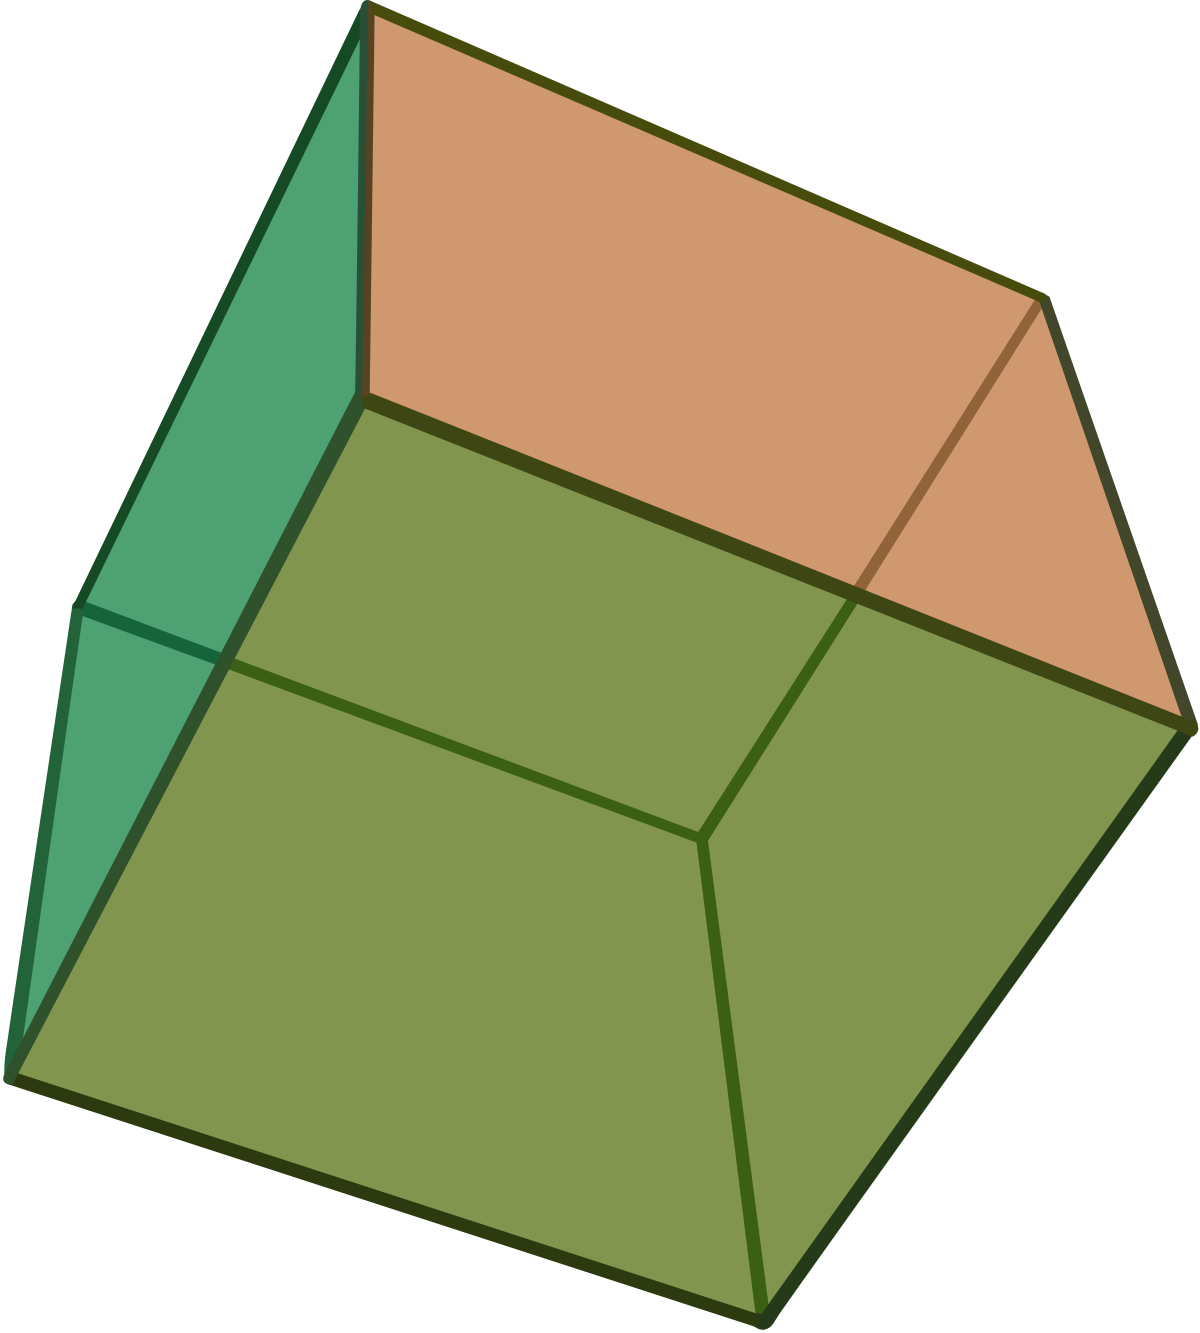 A Colorful Cube With Different Colored Squares